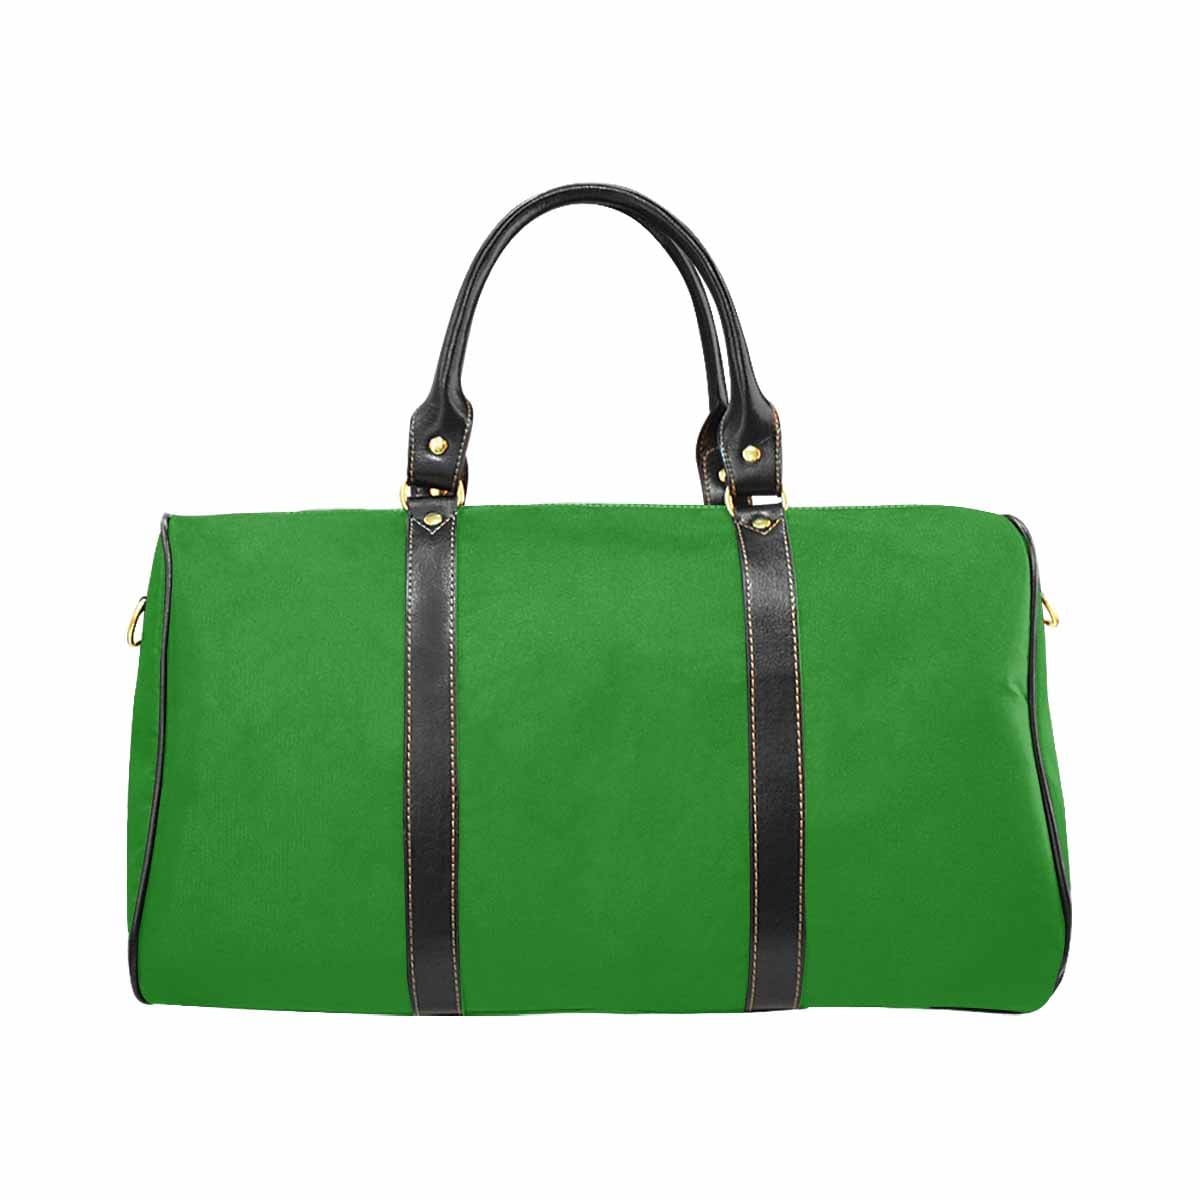 Travel Bag Leather Carry On Large Luggage Bag Forest Green - Bags | Travel Bags